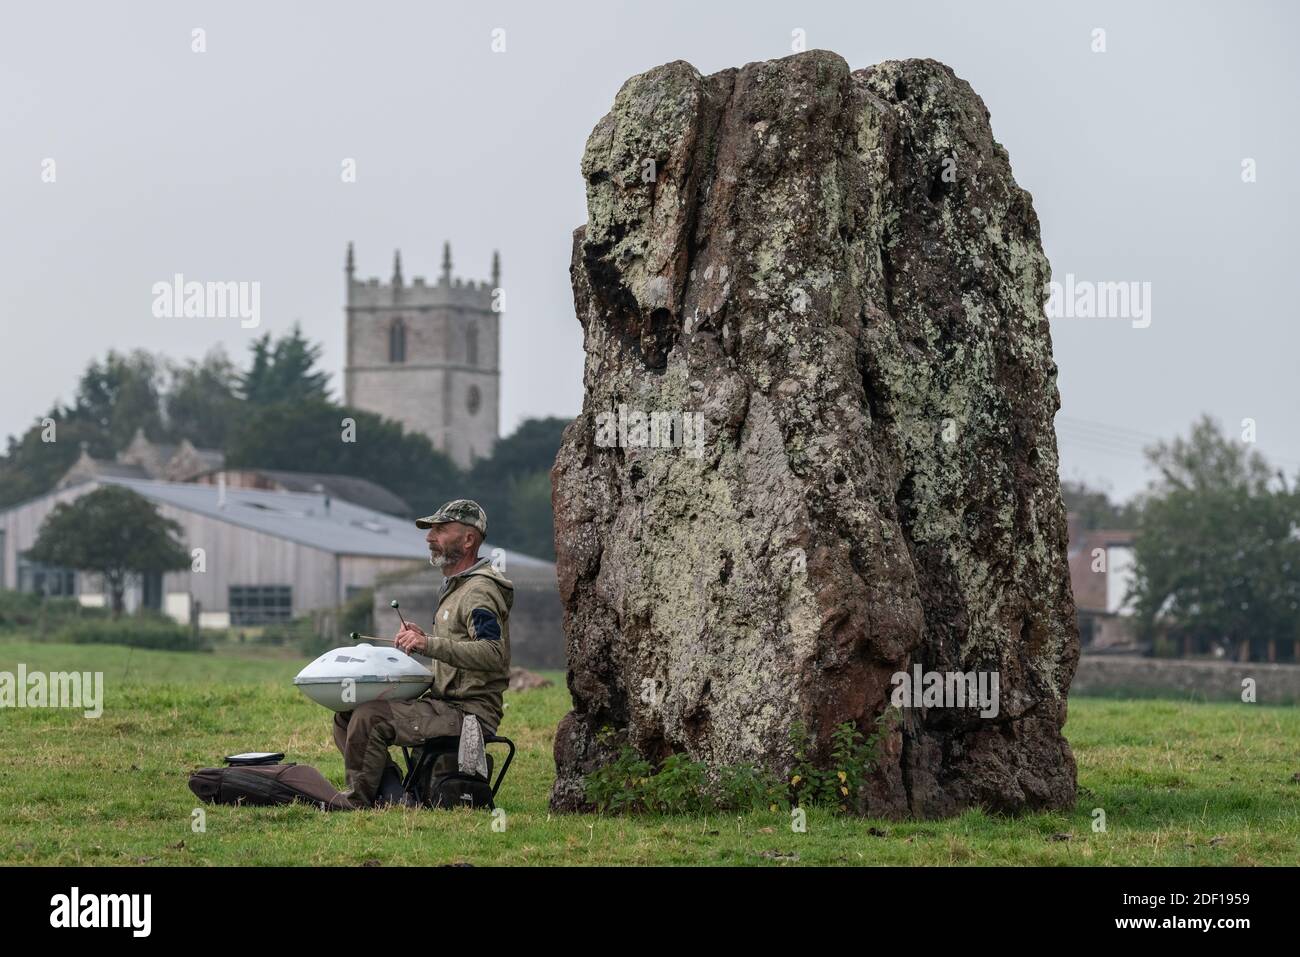 Autumn Equinox at Stanton Drew Stone Circle. A man plays a handpan drum or ‘Hang’ during the final morning before summer officially ends. Somerset, UK Stock Photo